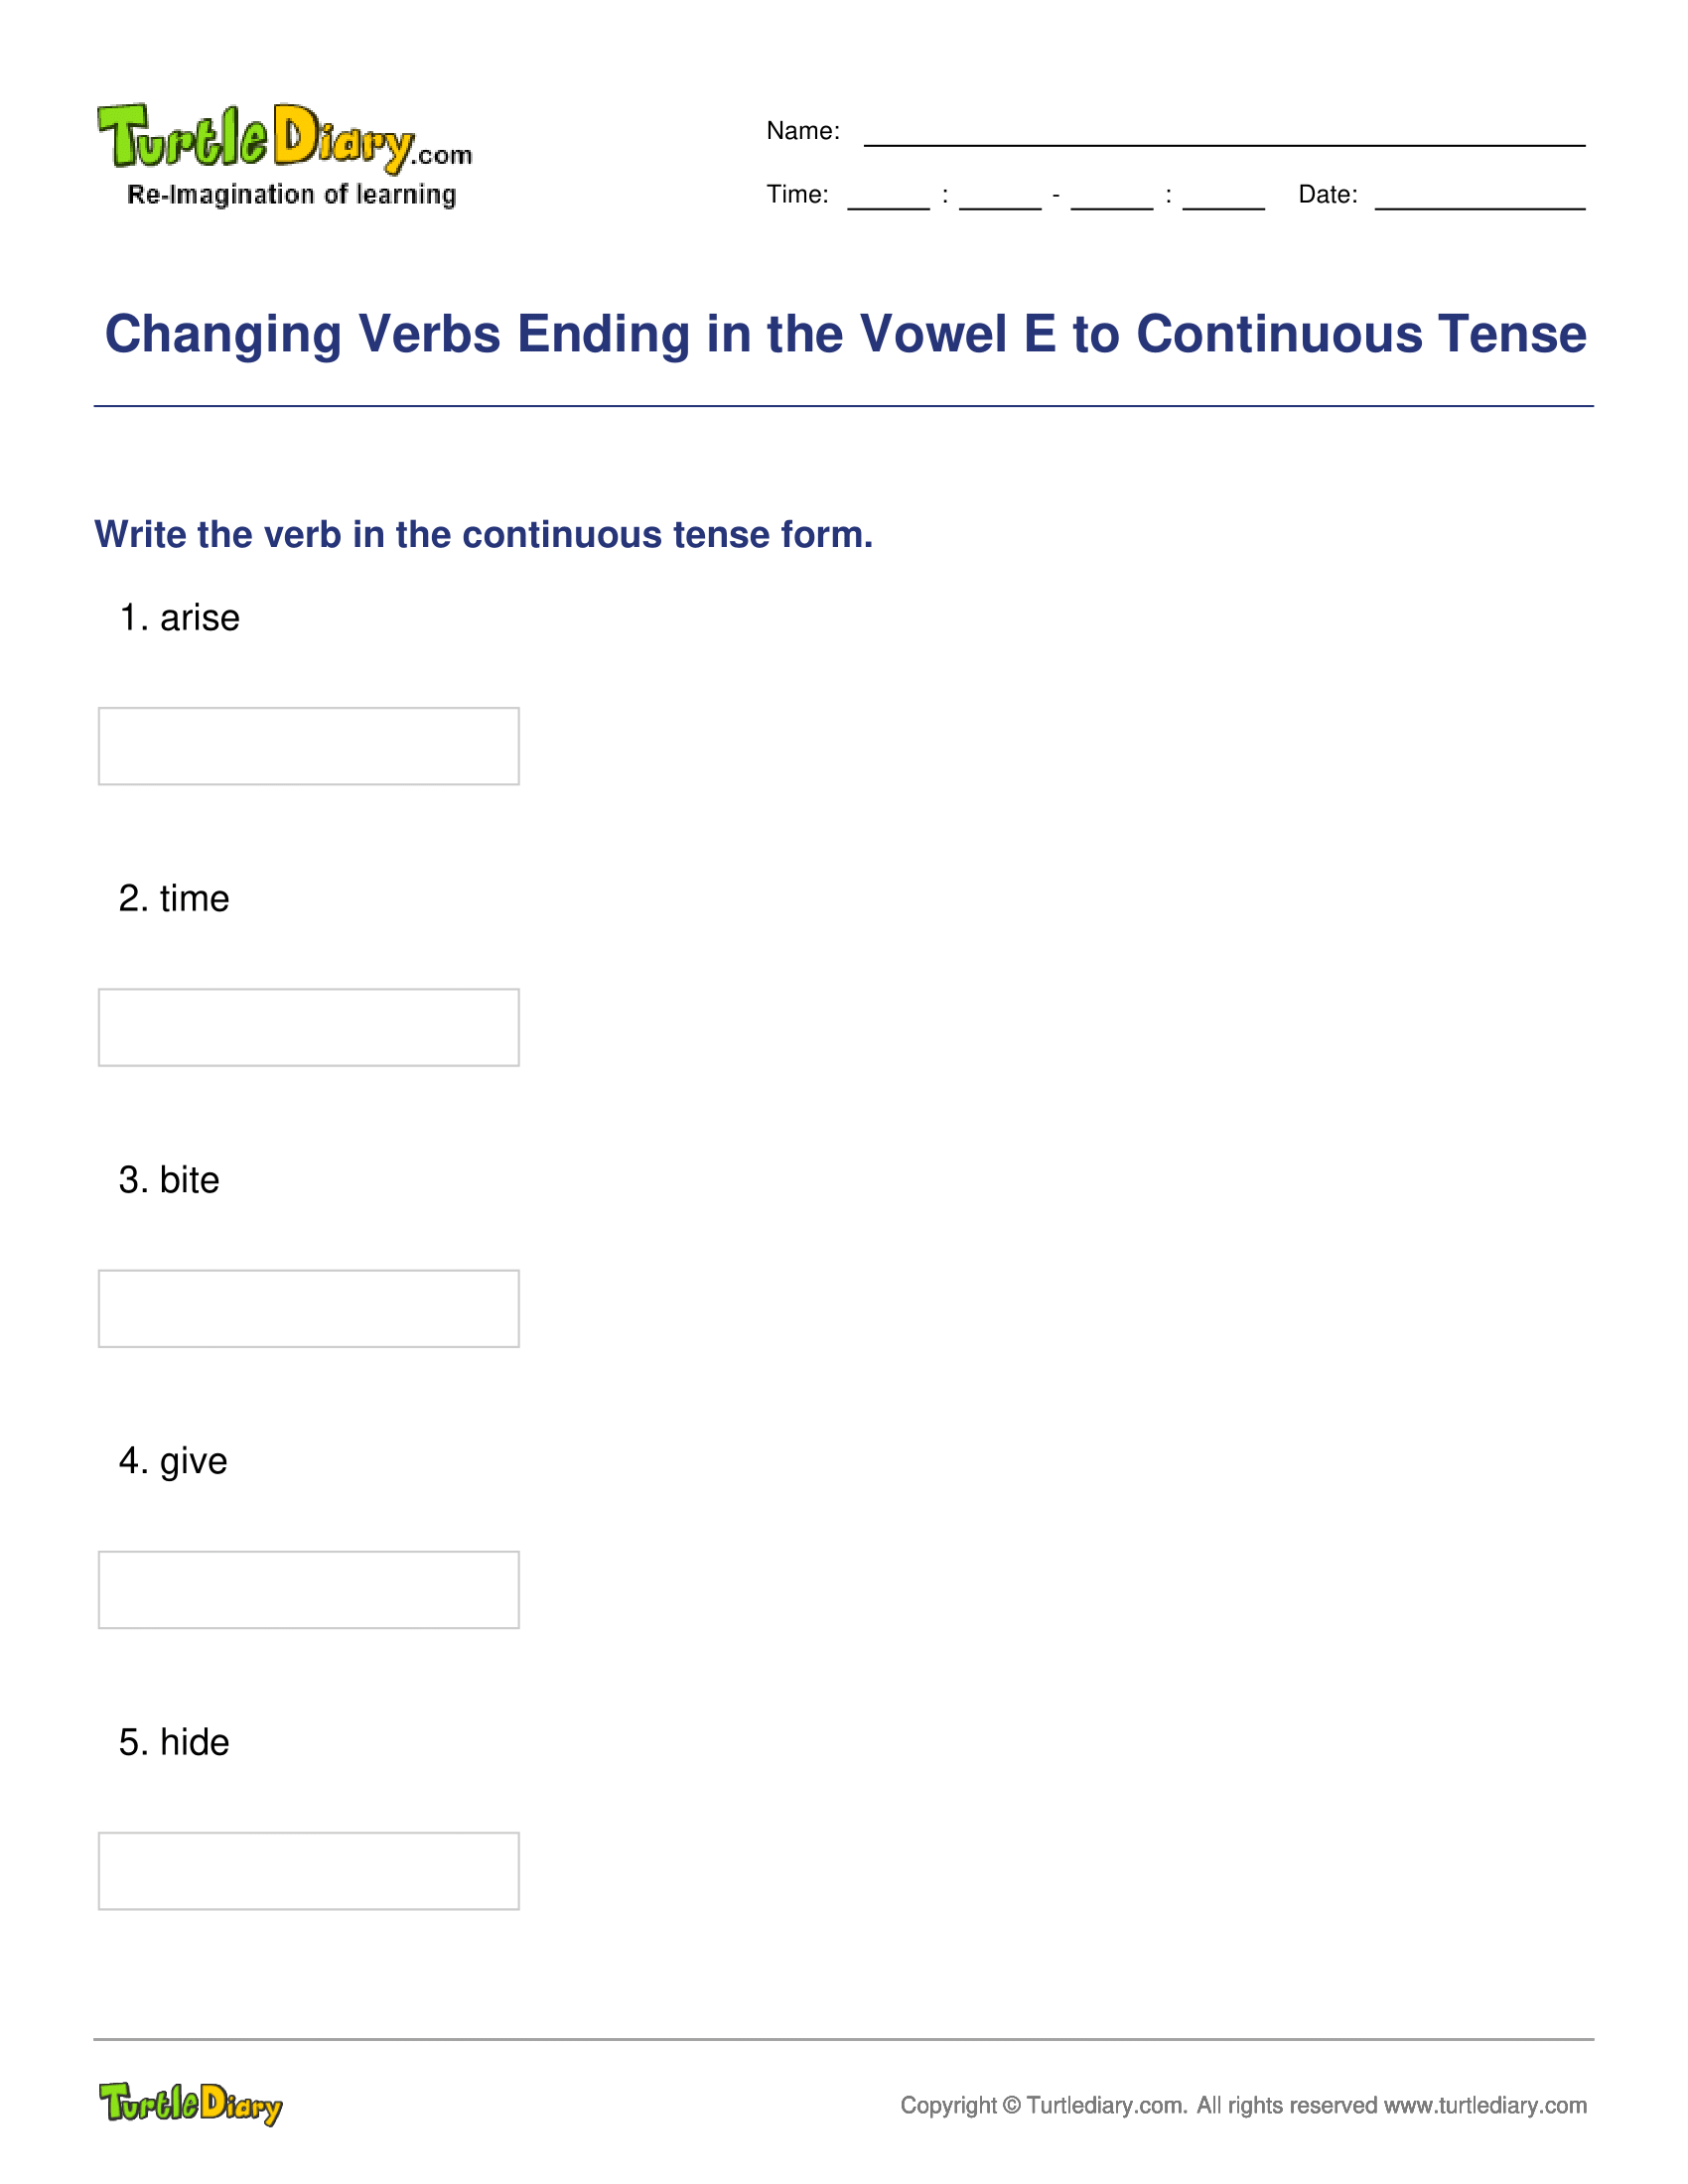 Changing Verbs Ending in the Vowel E to Continuous Tense